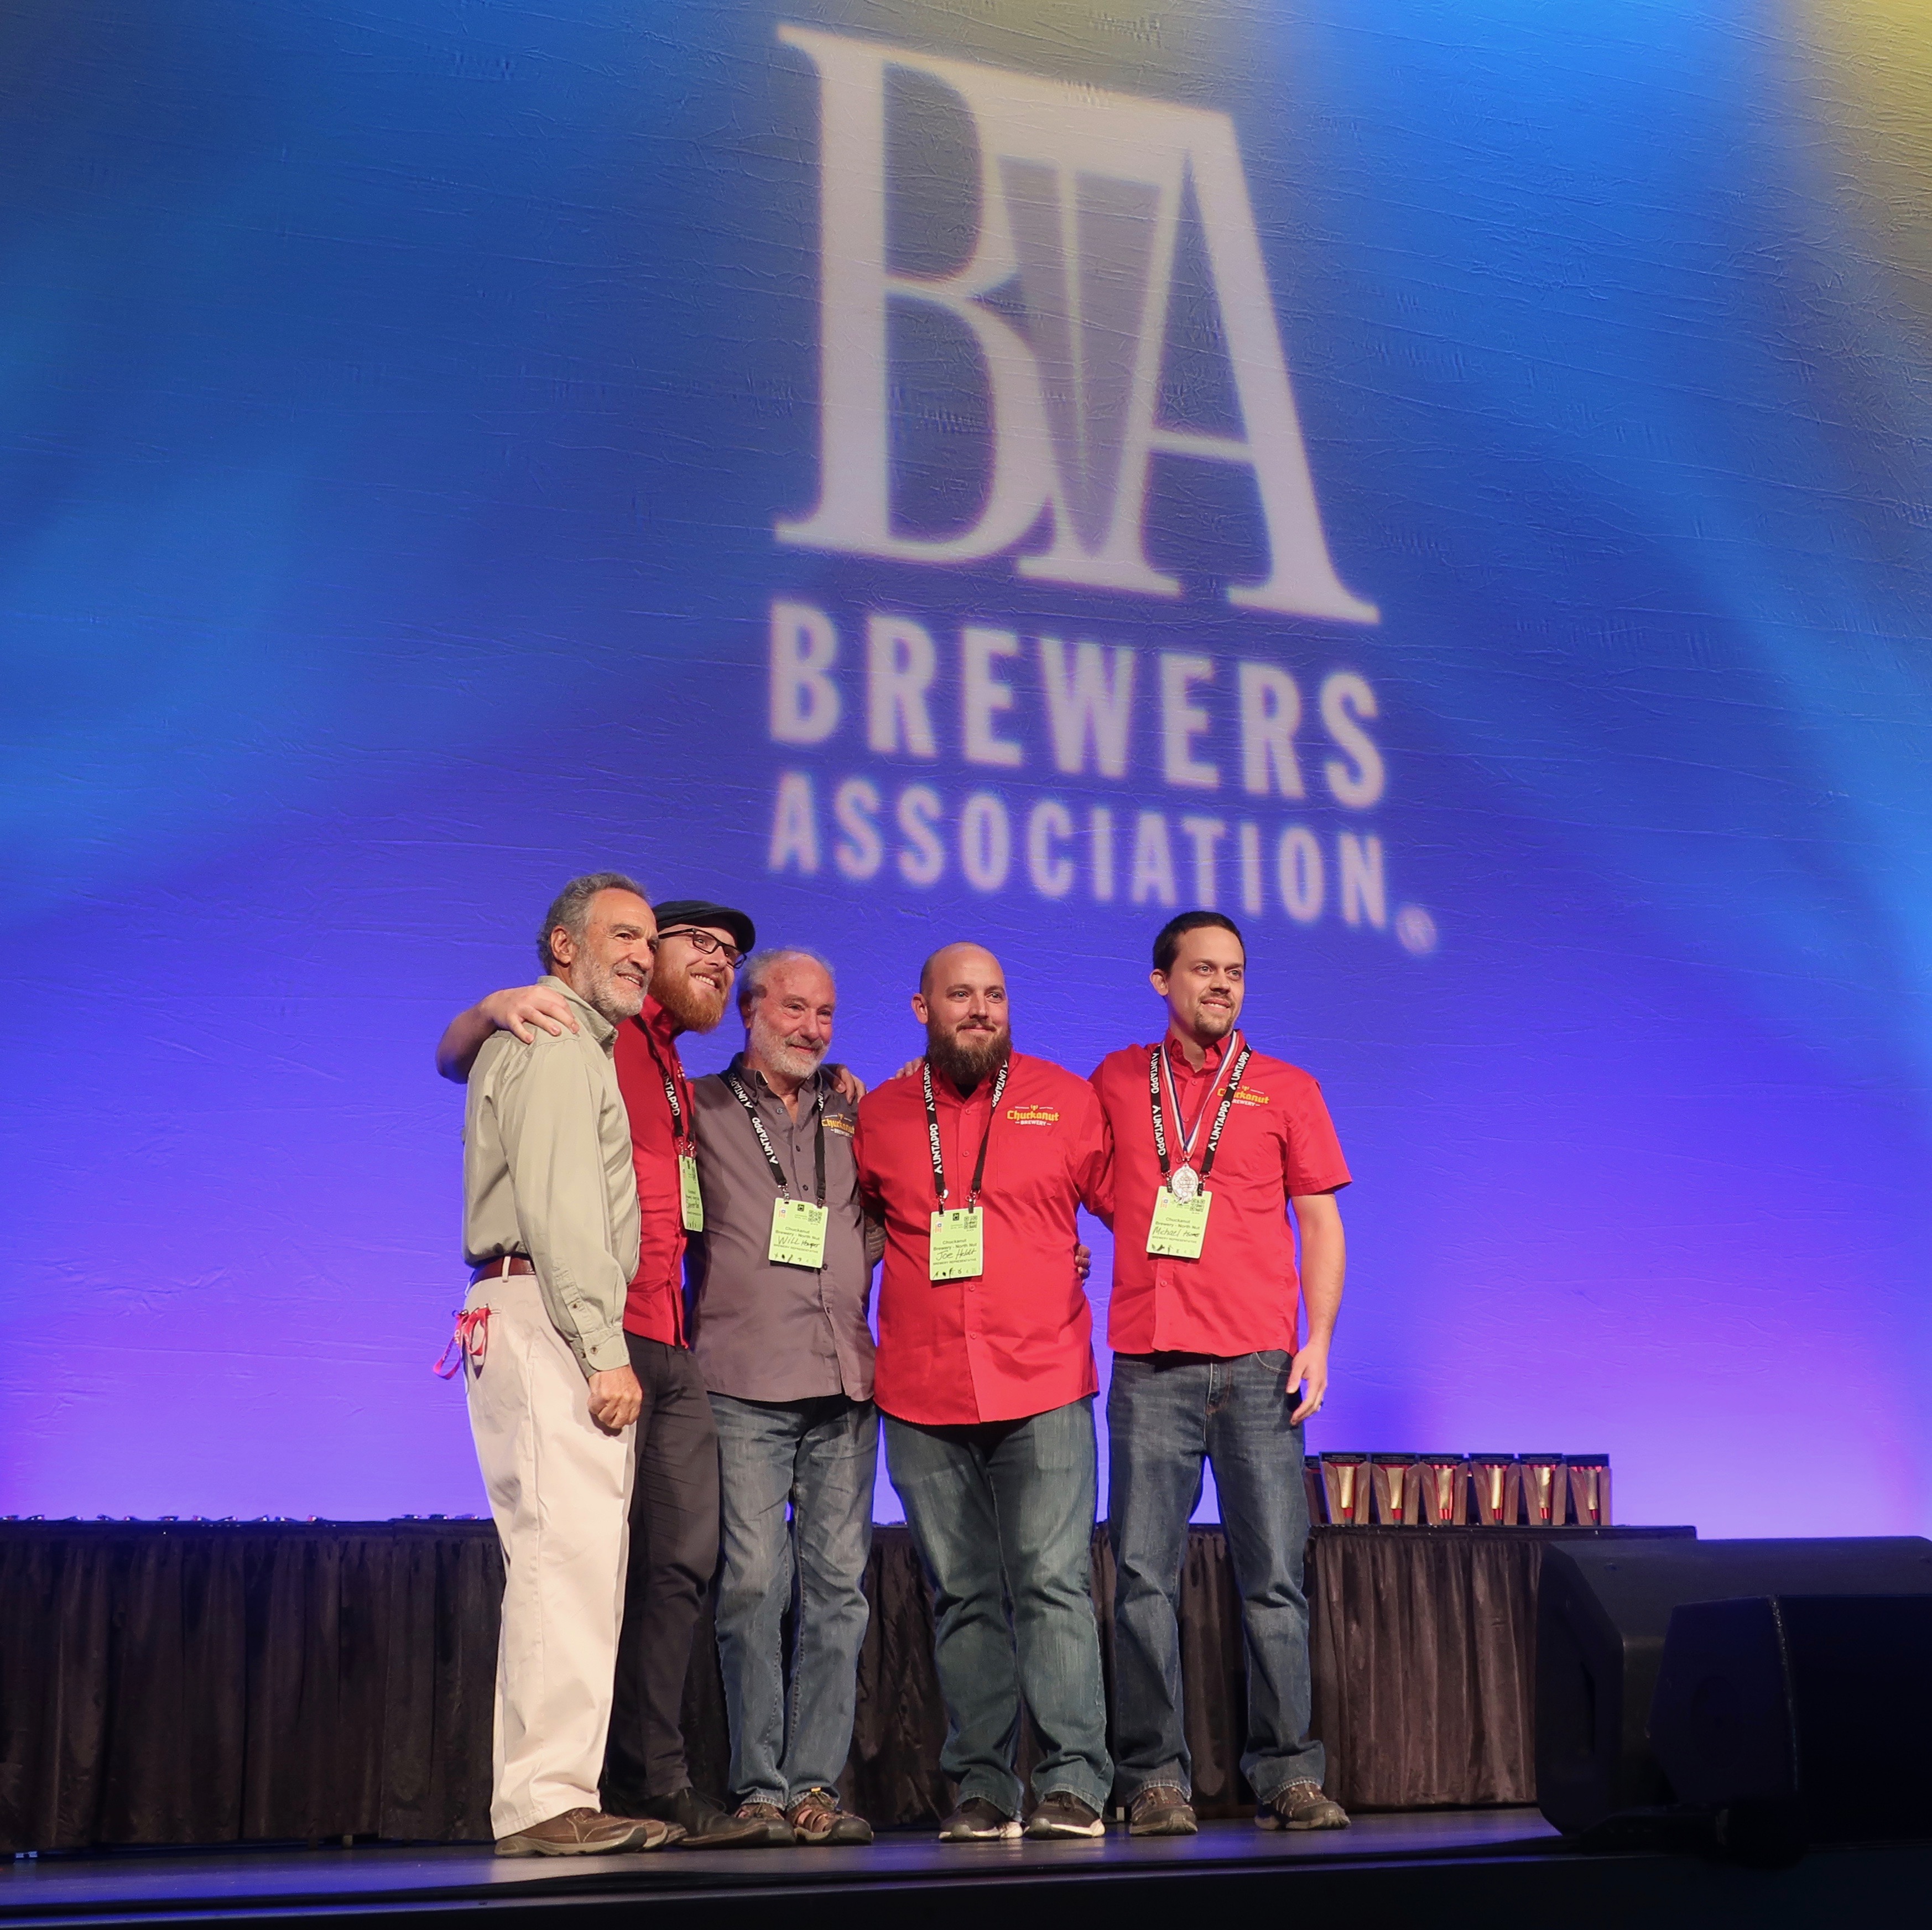 Chuckanut Brewery on stage for its first medal at the 2018 Great American Beer Festival.